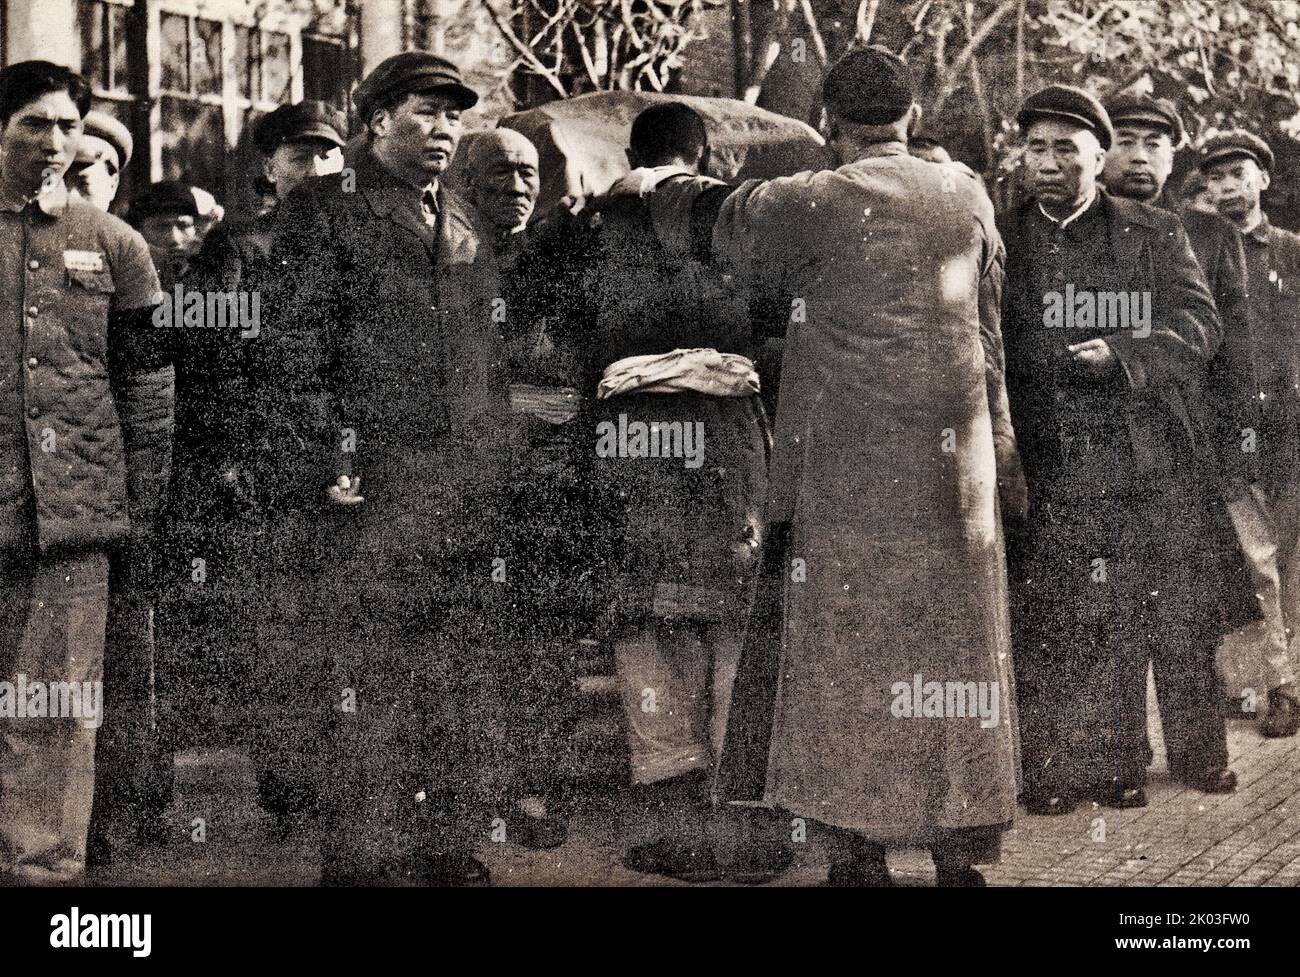 In the morning of October 28, Mao Zedong, Liu Shaoqi, Zhou Enlai, Zhu De and others personally observed Ren Bishi's body into the coffin and covered him with the party flag. Ren Bishi was a military and political leader in the early Chinese Communist Party. In the early 1930s, Stock Photo